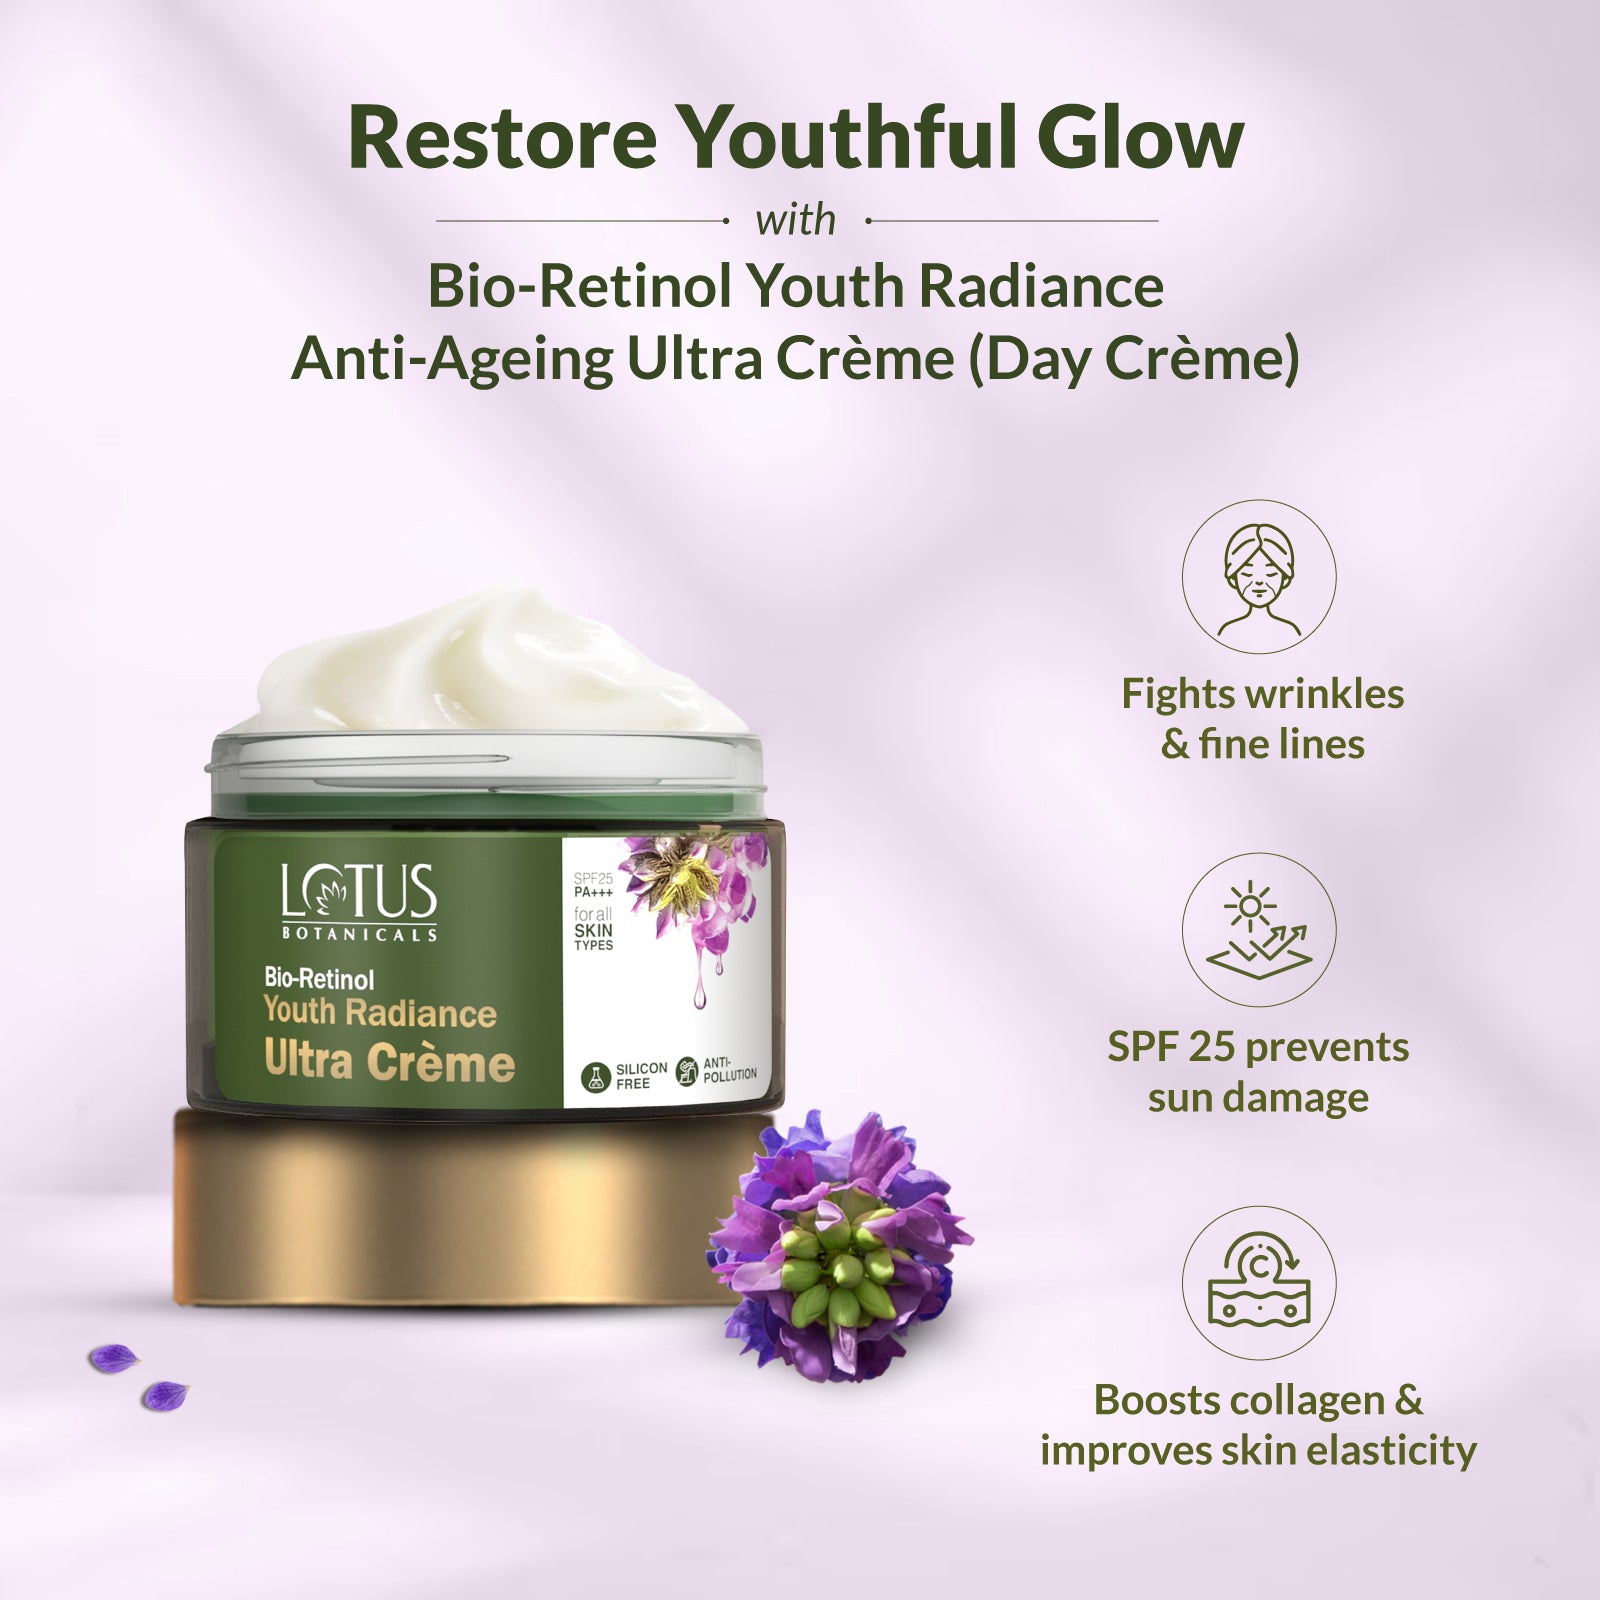 bio-retinol youth radiance anti-ageing ultra cr�me product image showing radiant and youthful skin